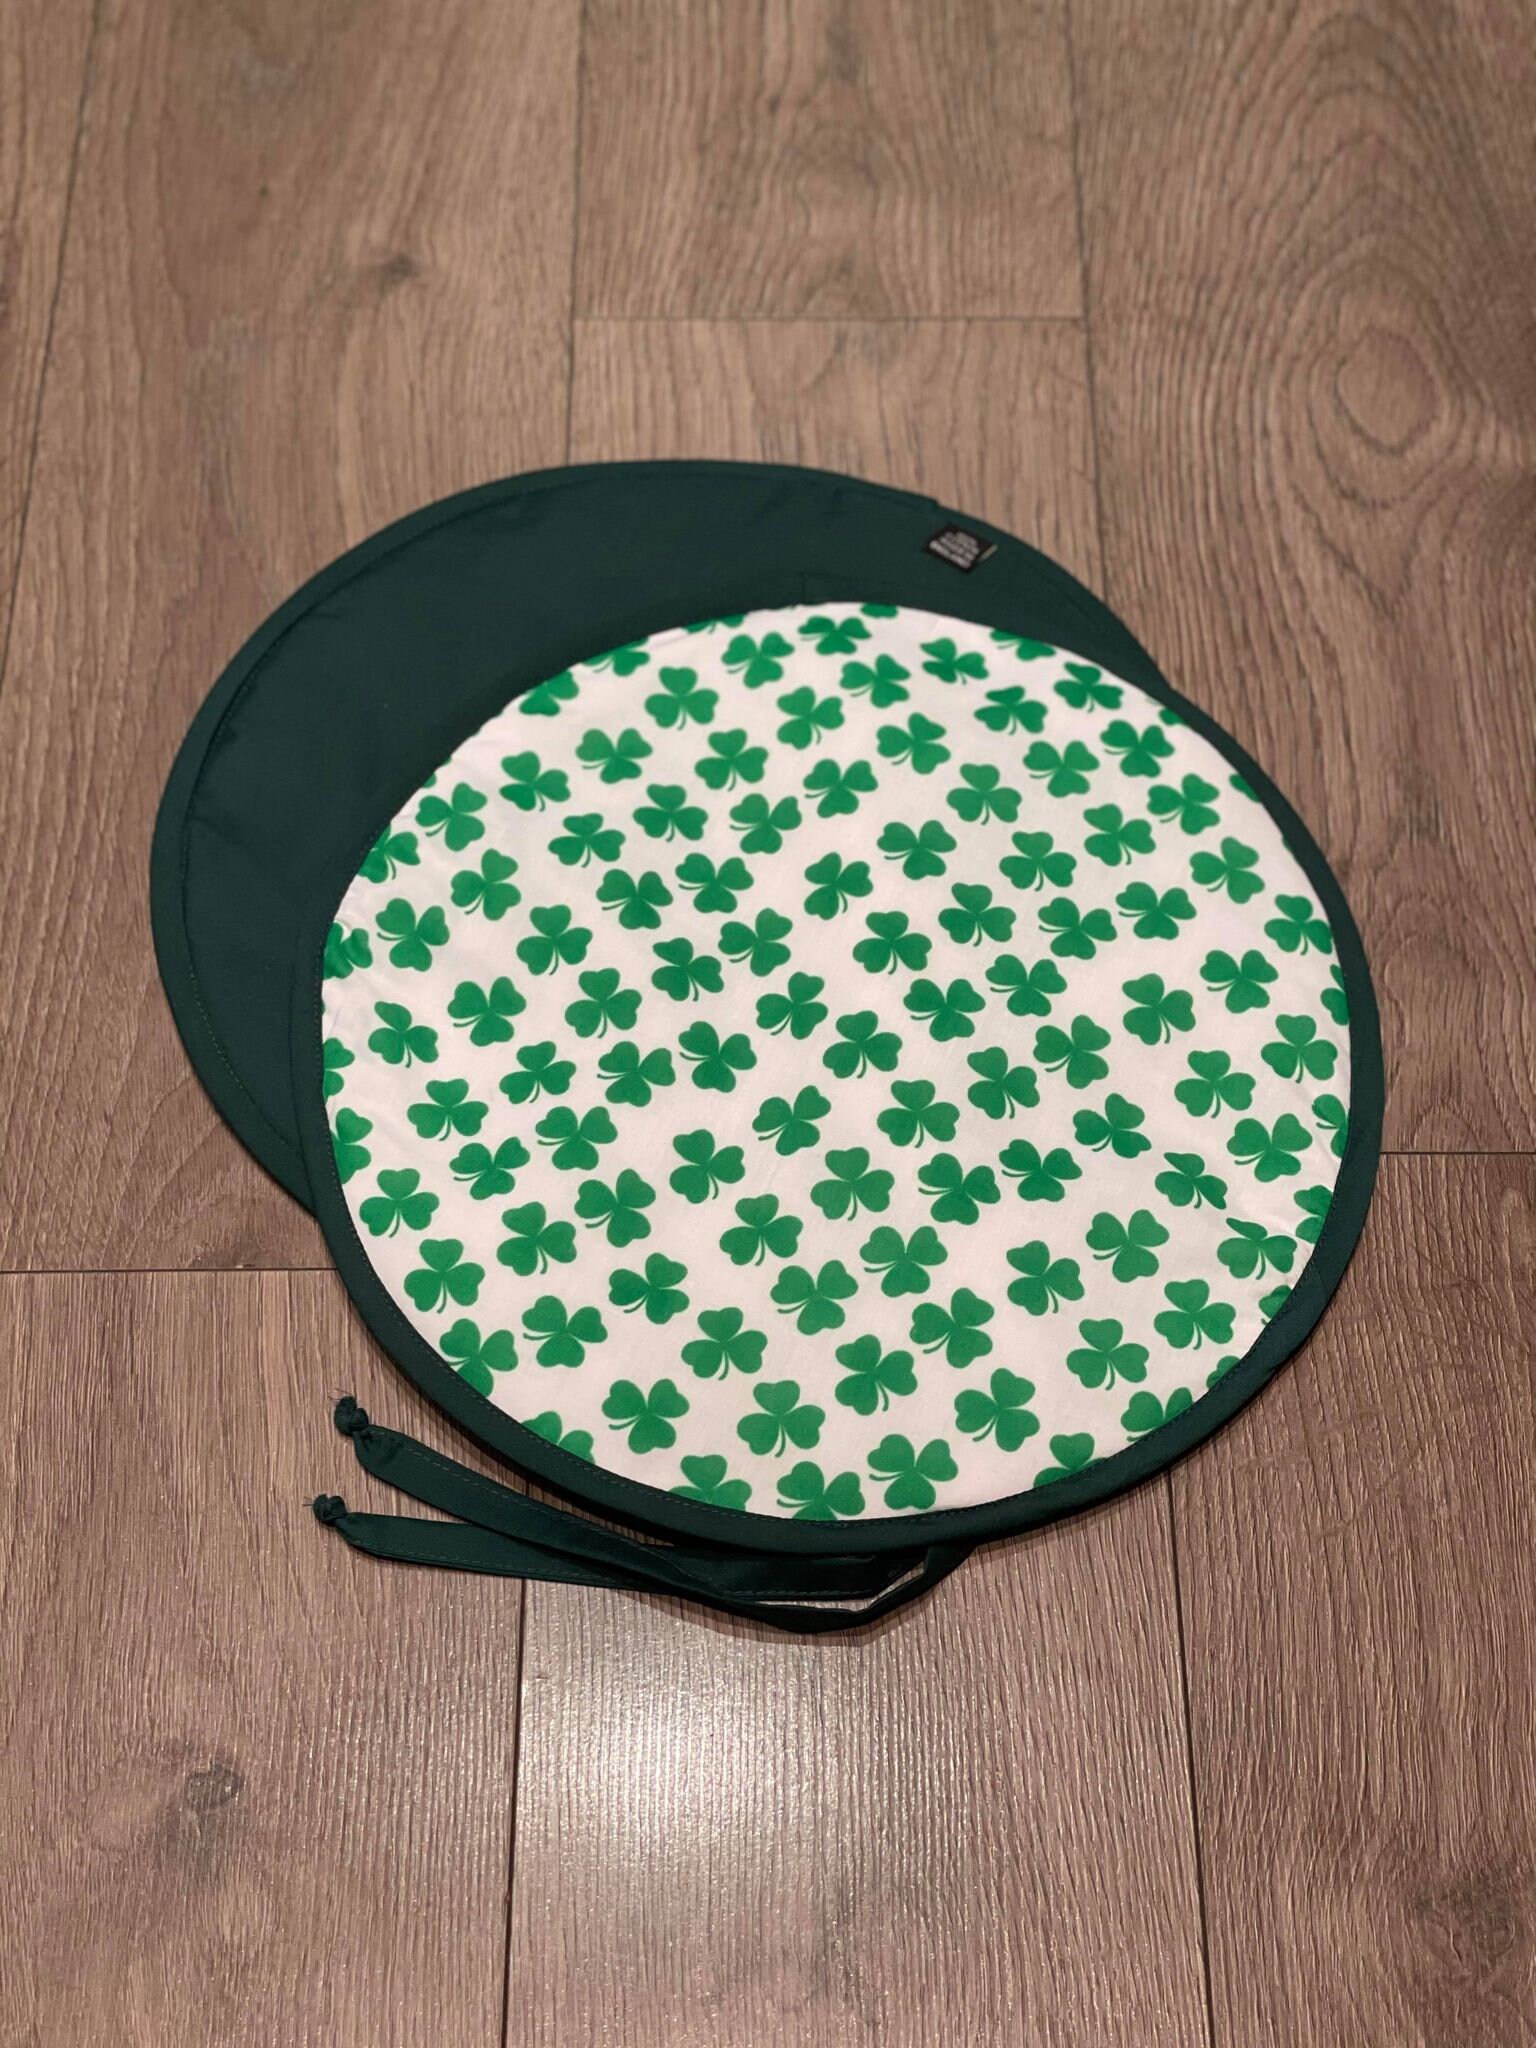 Pair of Aga Hob Lid Covers cotton Irish Plane Green with straps